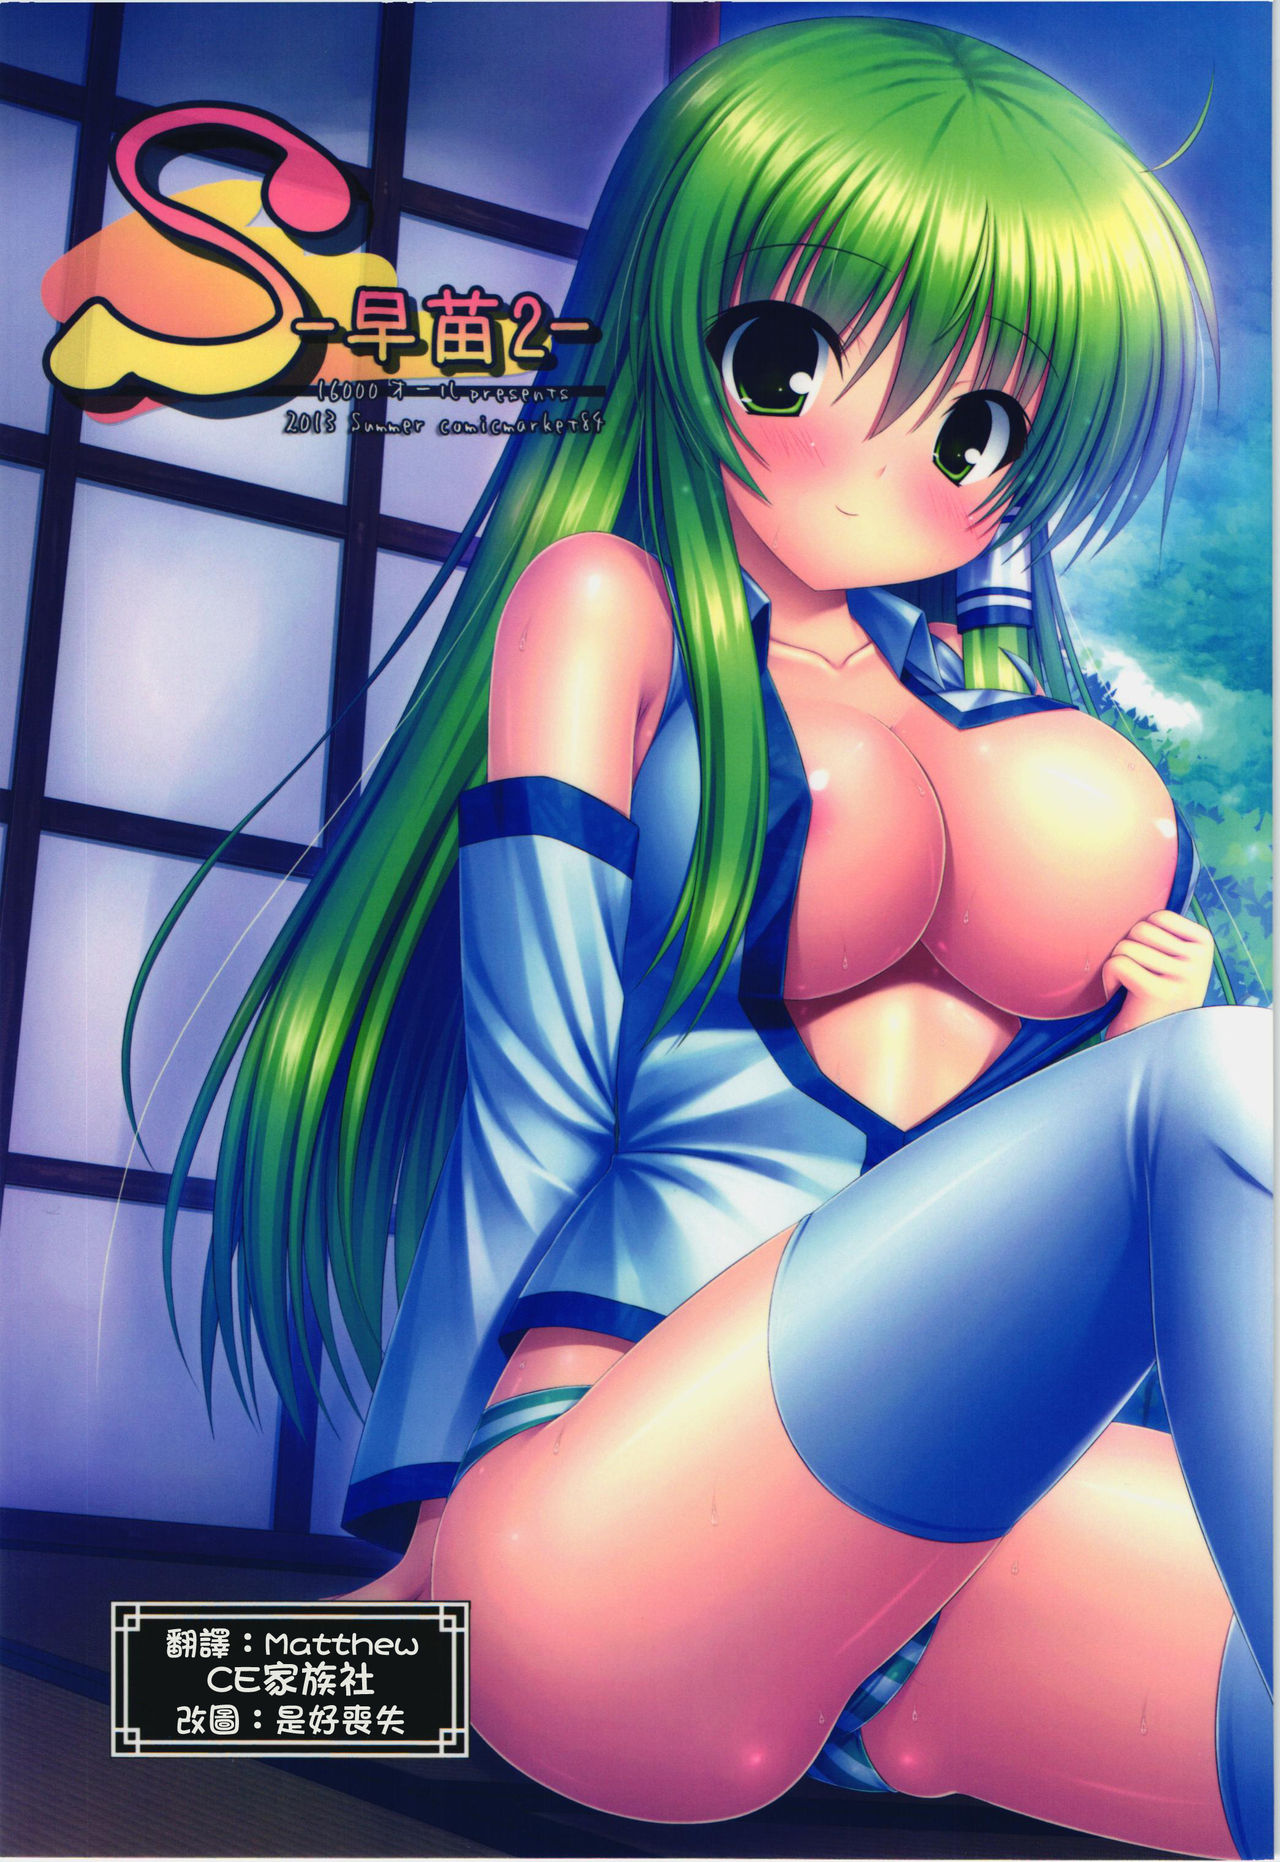 (C84) [16000 All (Takeponian)] S -Sanae 2- (Touhou Project) [Chinese] 【CE家族社】 (C84) [16000オール (たけぽにあん)] S-早苗2- (東方Project) [中国翻訳]